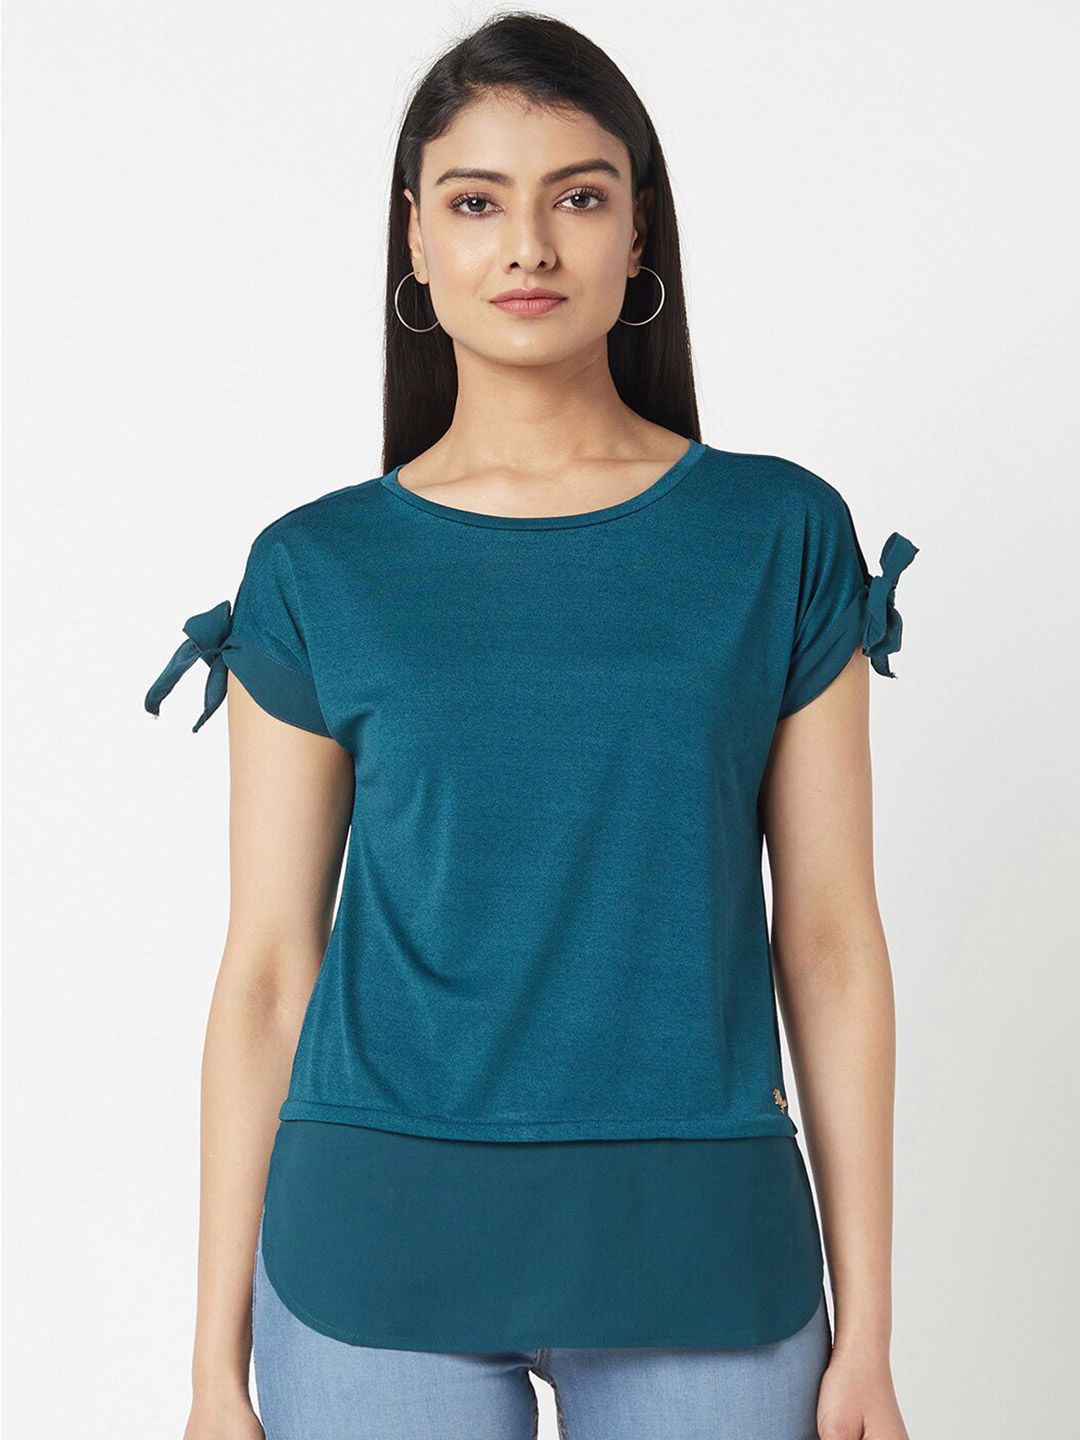 Miss Grace Green Top Price in India